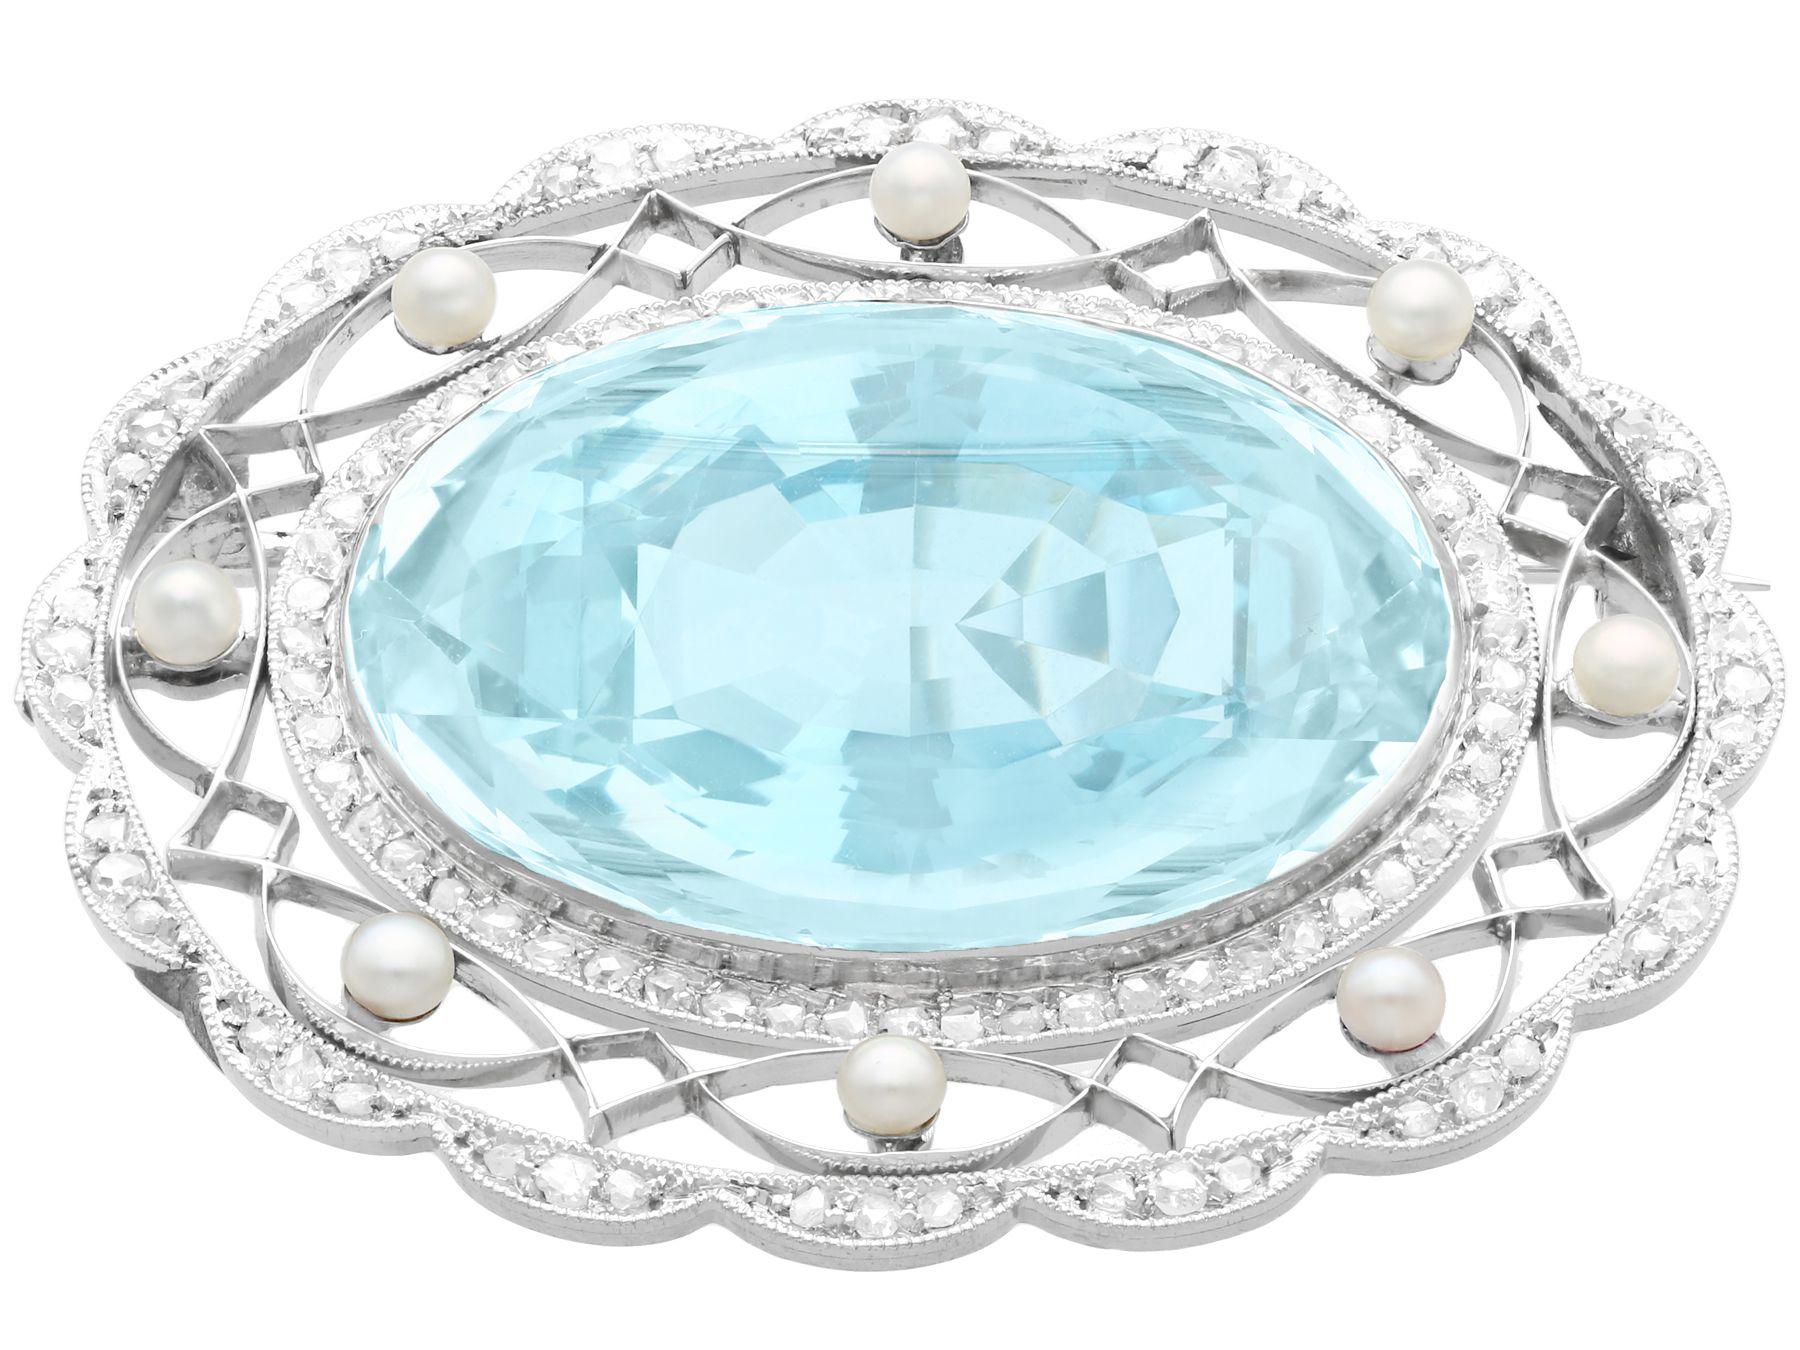 A stunning antique 43.84 carat oval cut aquamarine, 0.85 carat diamond and pearl, platinum and silver set brooch; part of our antique jewelry and estate jewelry collections.

This stunning, fine and impressive antique aquamarine brooch has been